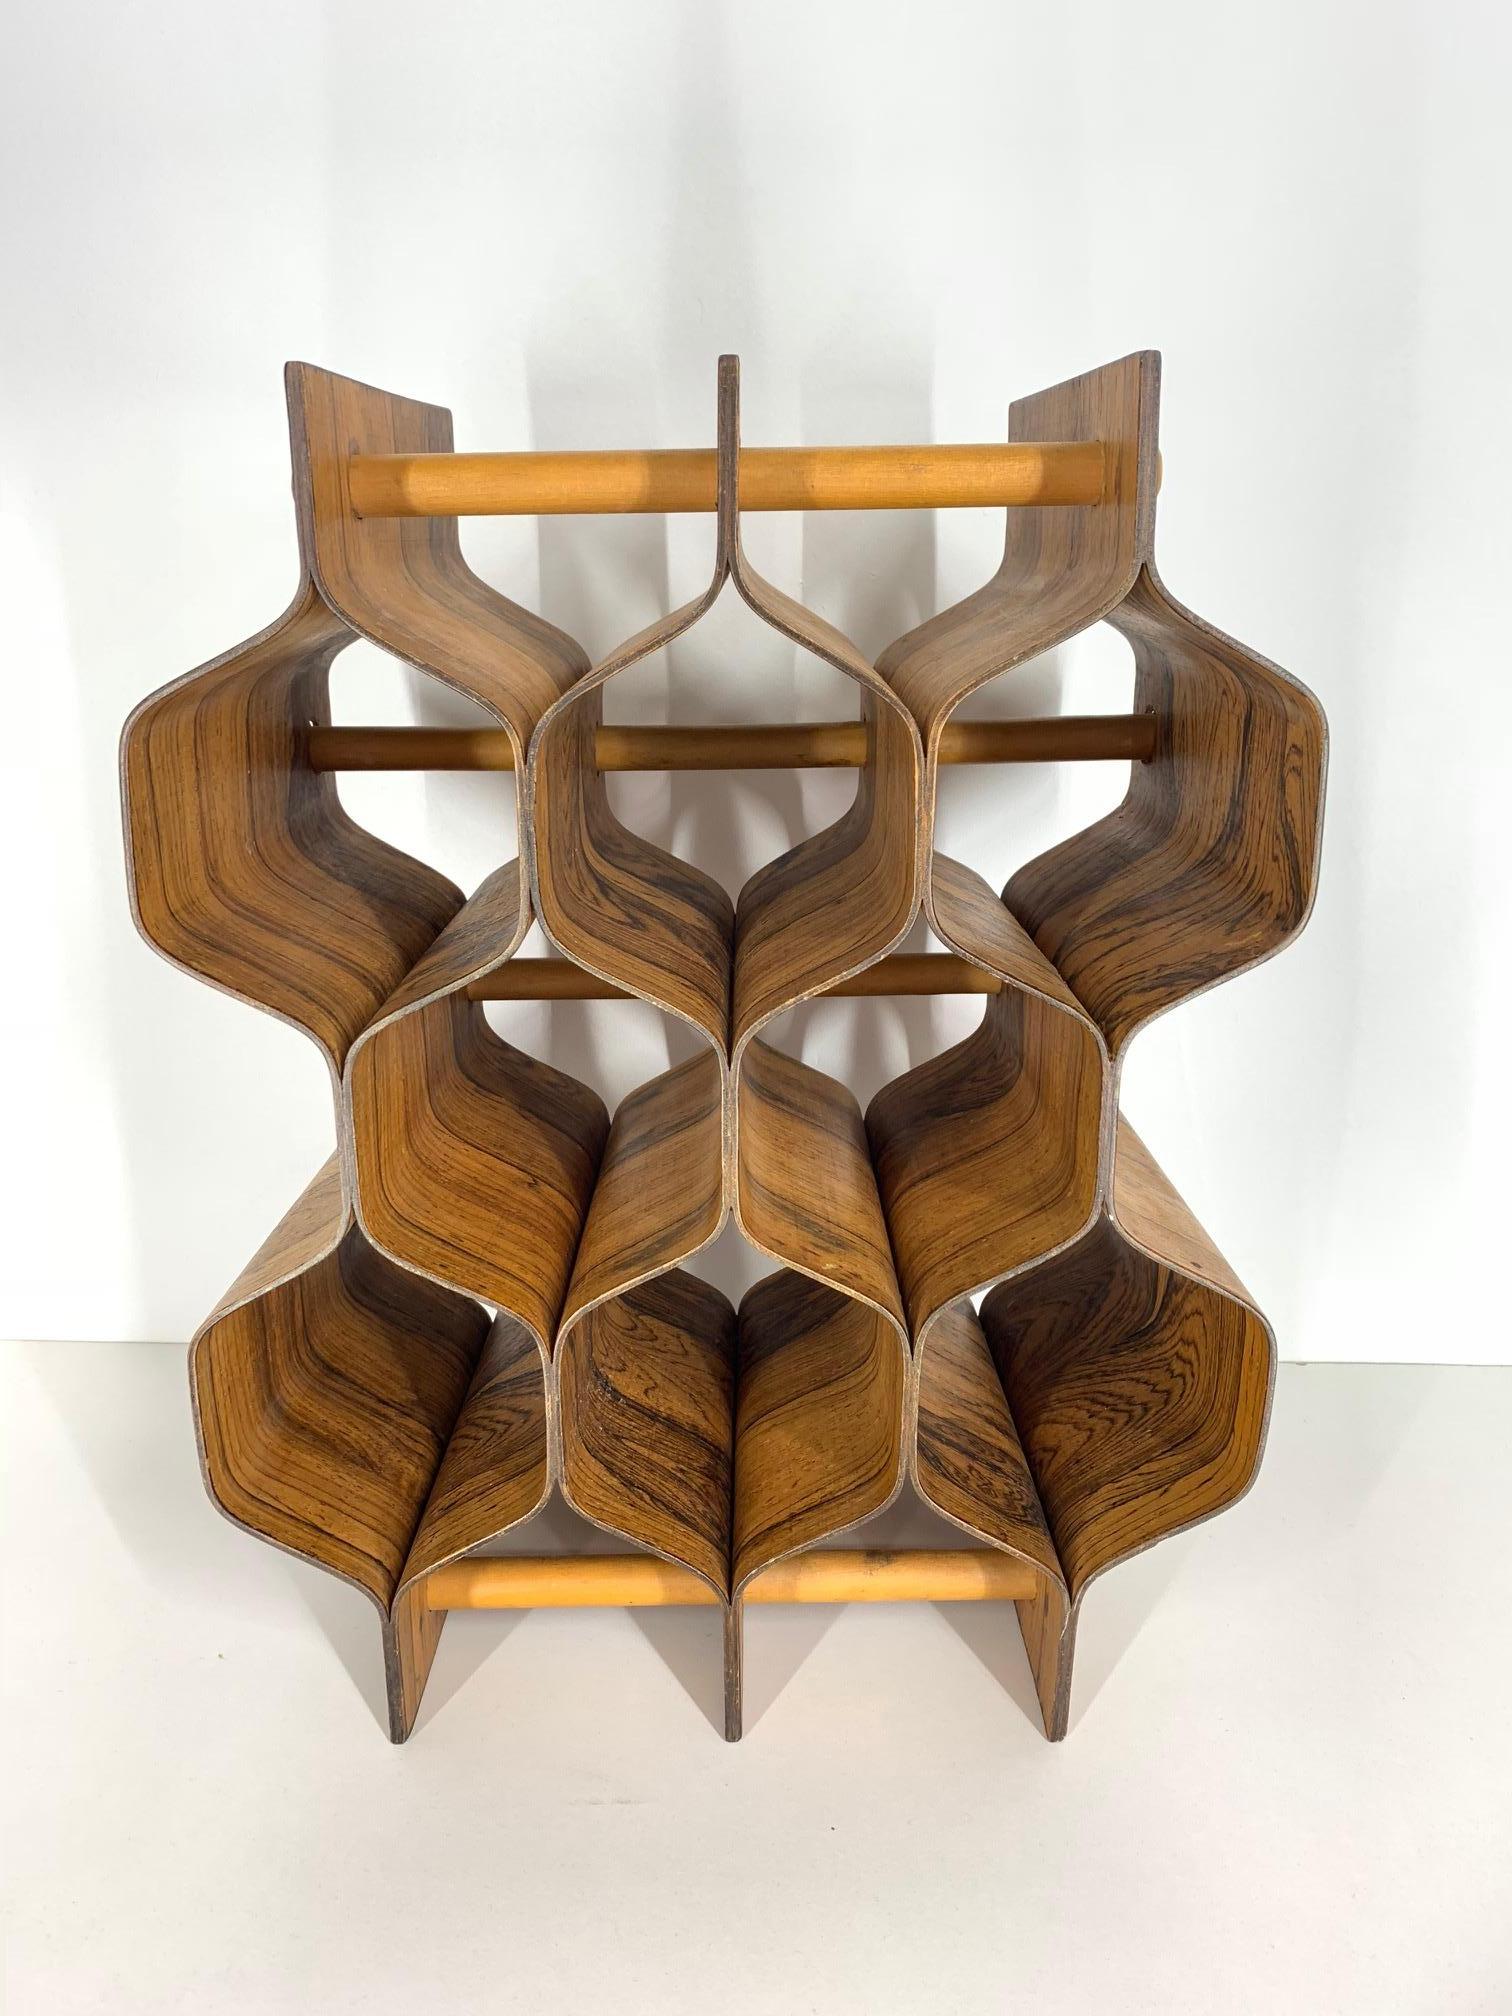 Rosewood wine rack by Swedish designer, Torsten Johansson (1917-1996) for Ab Formträ. Holds 8 bottles. Signed. Excellent example of Minimalist Mid-Century Modern design. Very good condition with one slight discoloration on rear corner of lower level